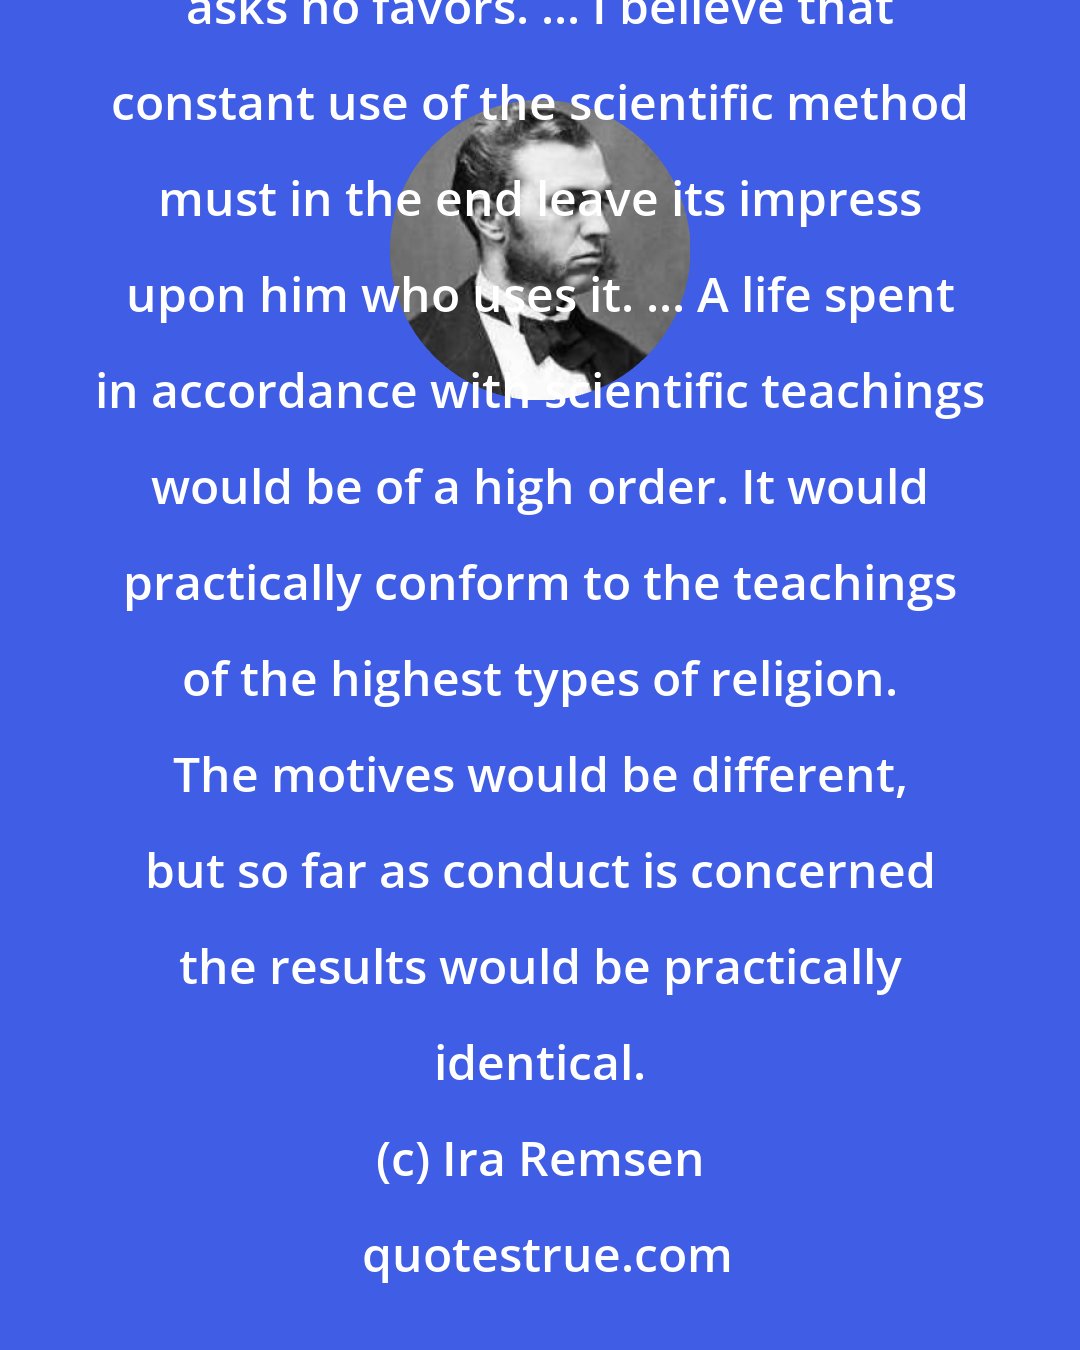 Ira Remsen: The fundamental characteristic of the scientific method is honesty. In dealing with any question, science asks no favors. ... I believe that constant use of the scientific method must in the end leave its impress upon him who uses it. ... A life spent in accordance with scientific teachings would be of a high order. It would practically conform to the teachings of the highest types of religion. The motives would be different, but so far as conduct is concerned the results would be practically identical.